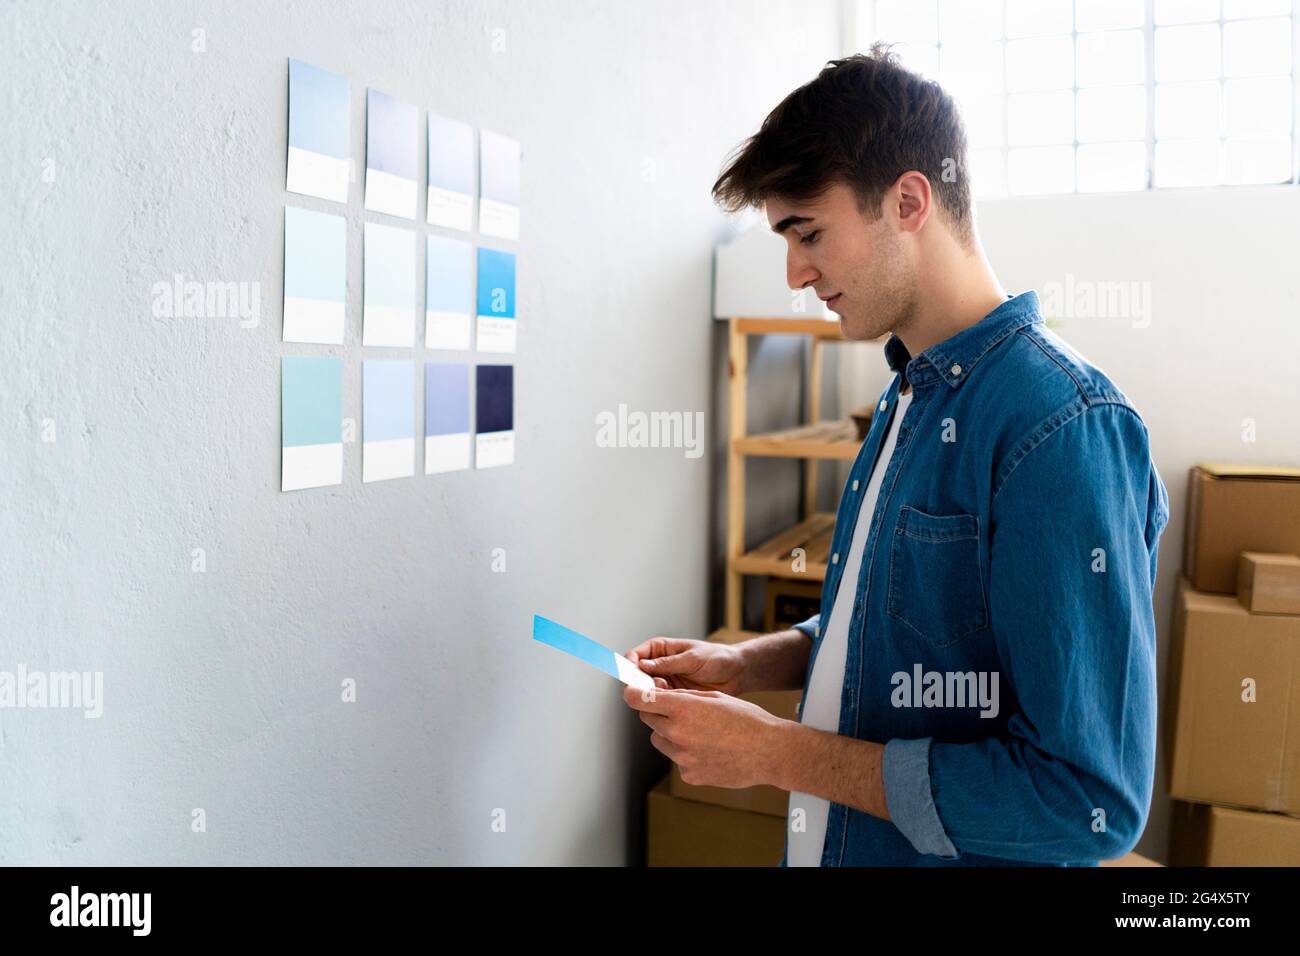 Businessman looking at blue card in front of wall at warehouse Stock Photo